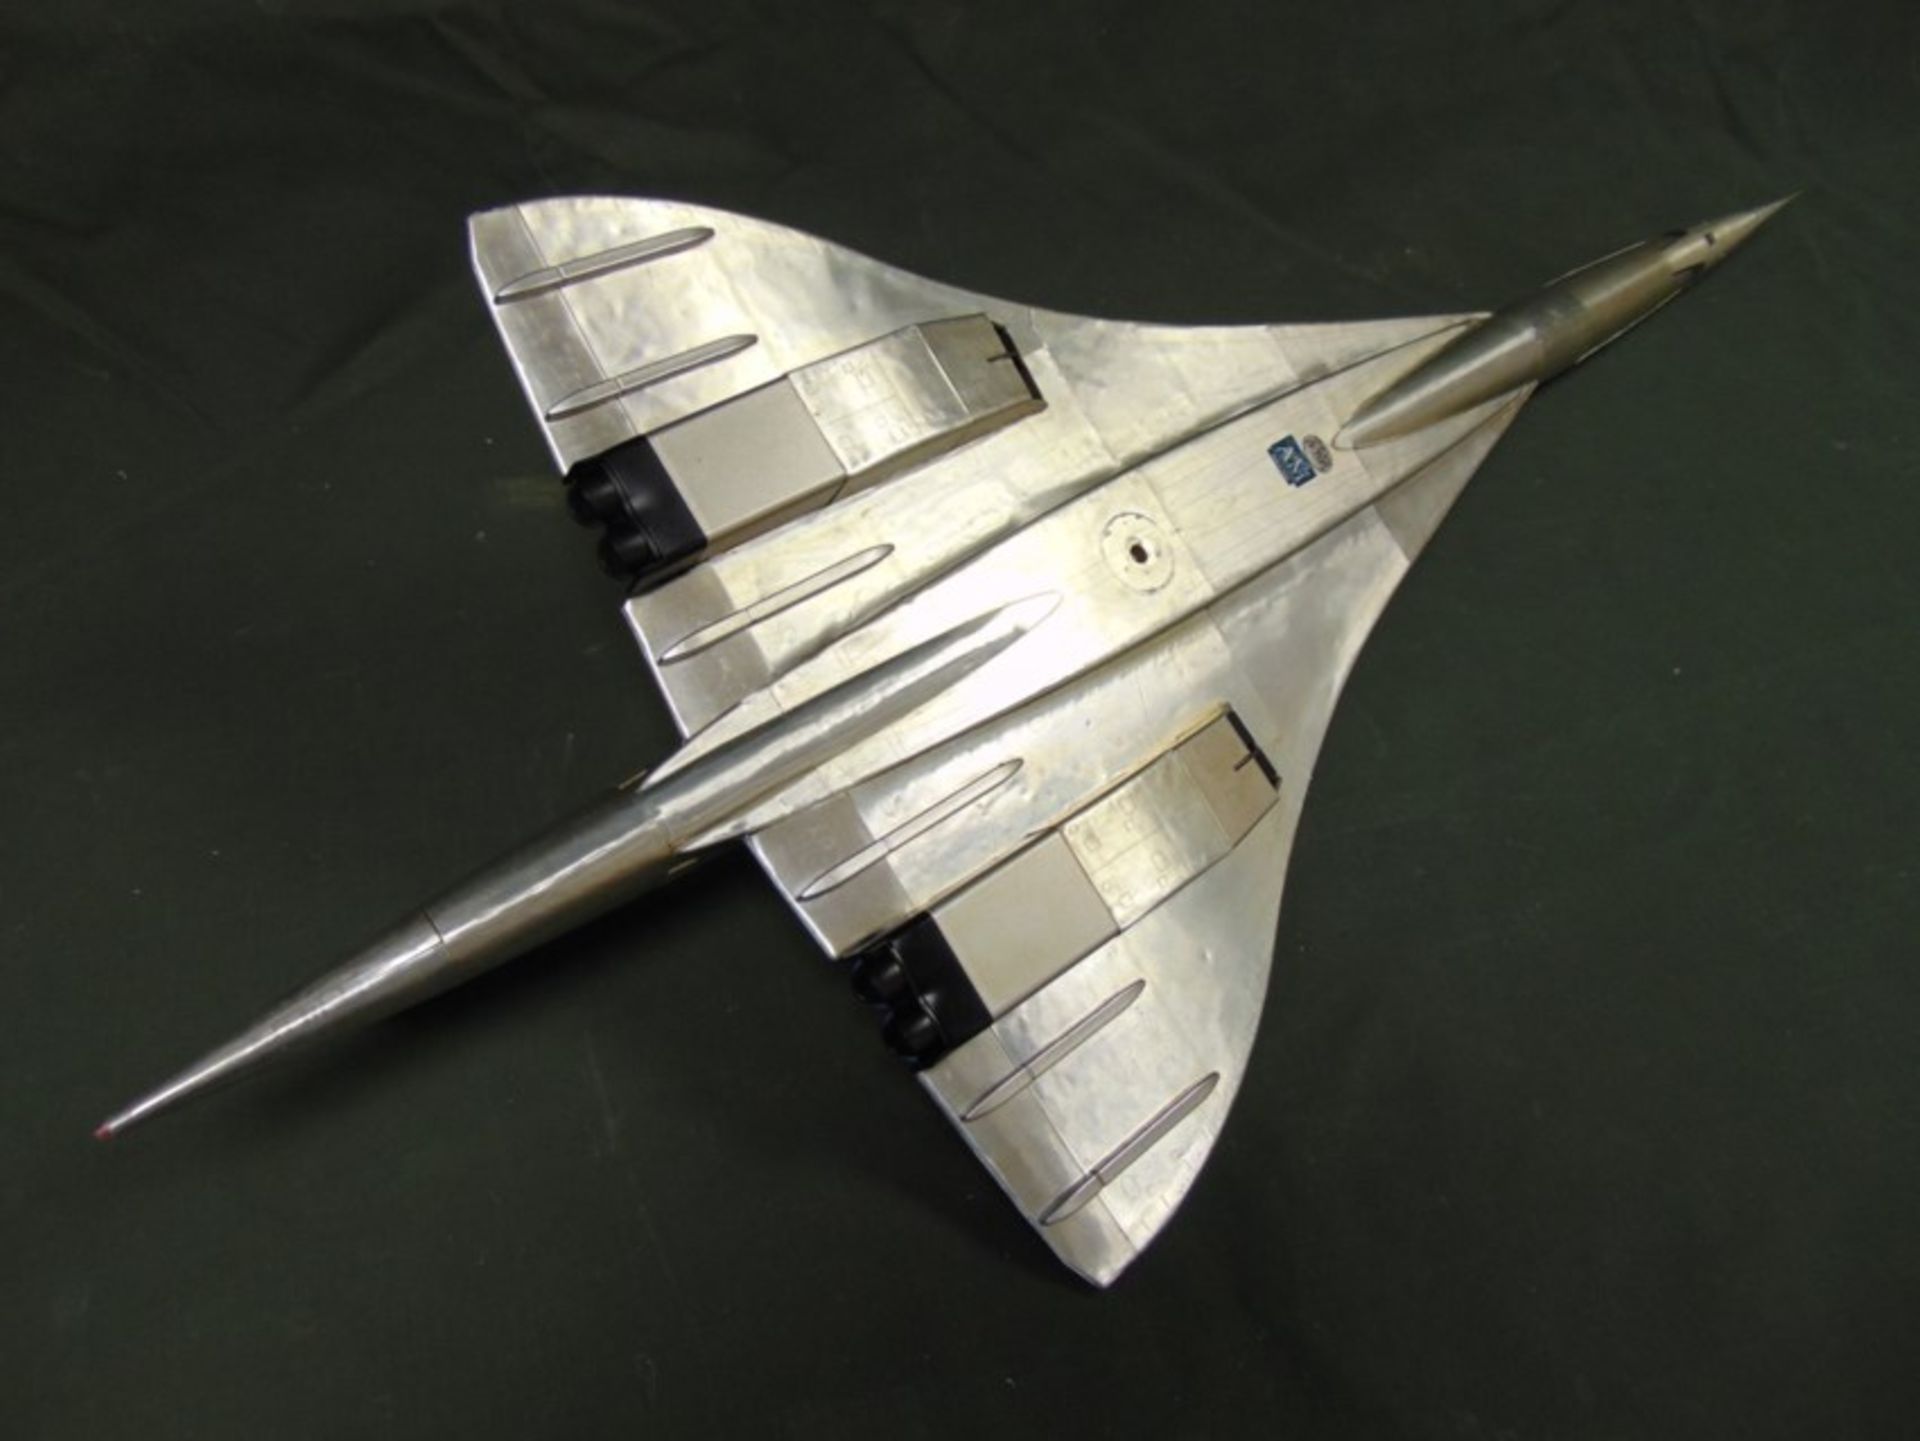 NEW JUST LANDED Large Aluminium Concorde Model - Image 9 of 14